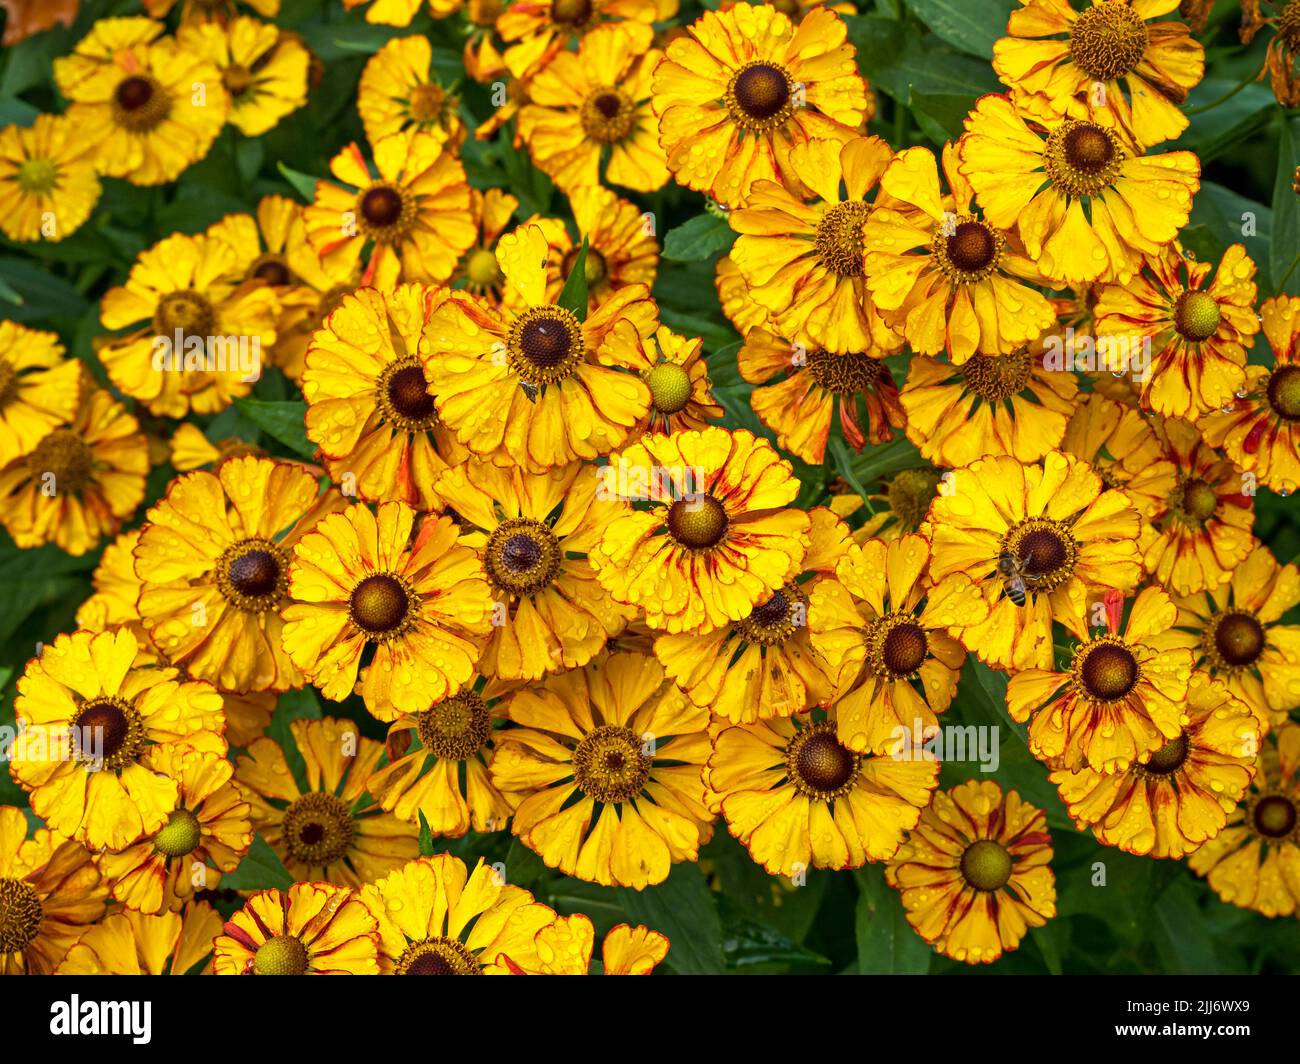 Helenium sneezeweed flowers after a rain shower Stock Photo